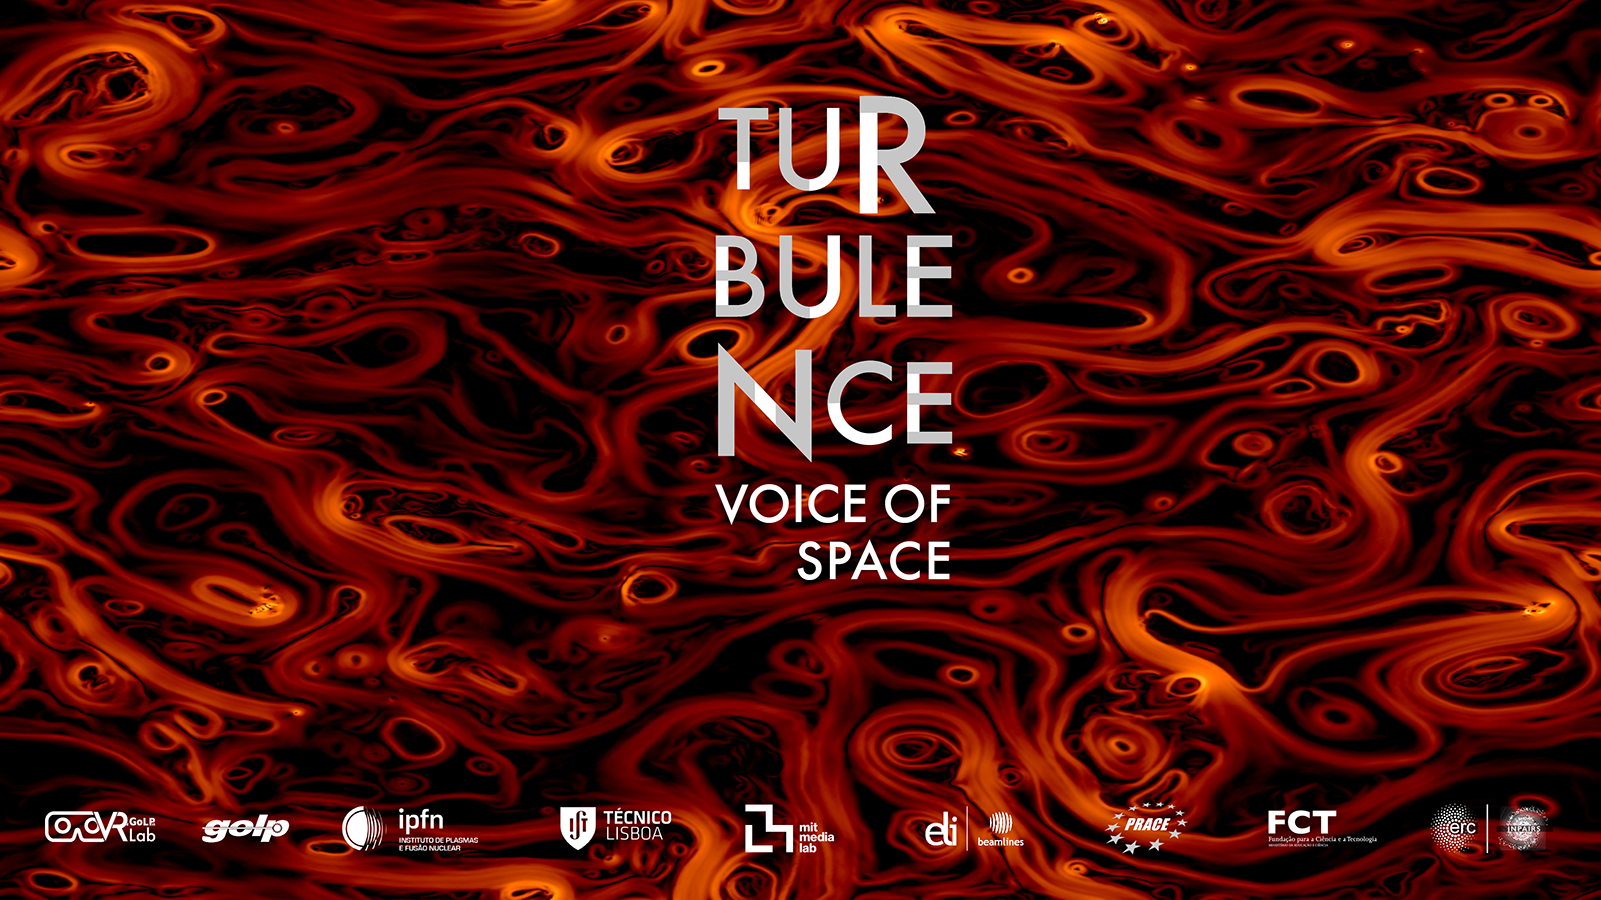 Turbulence Voice of Space